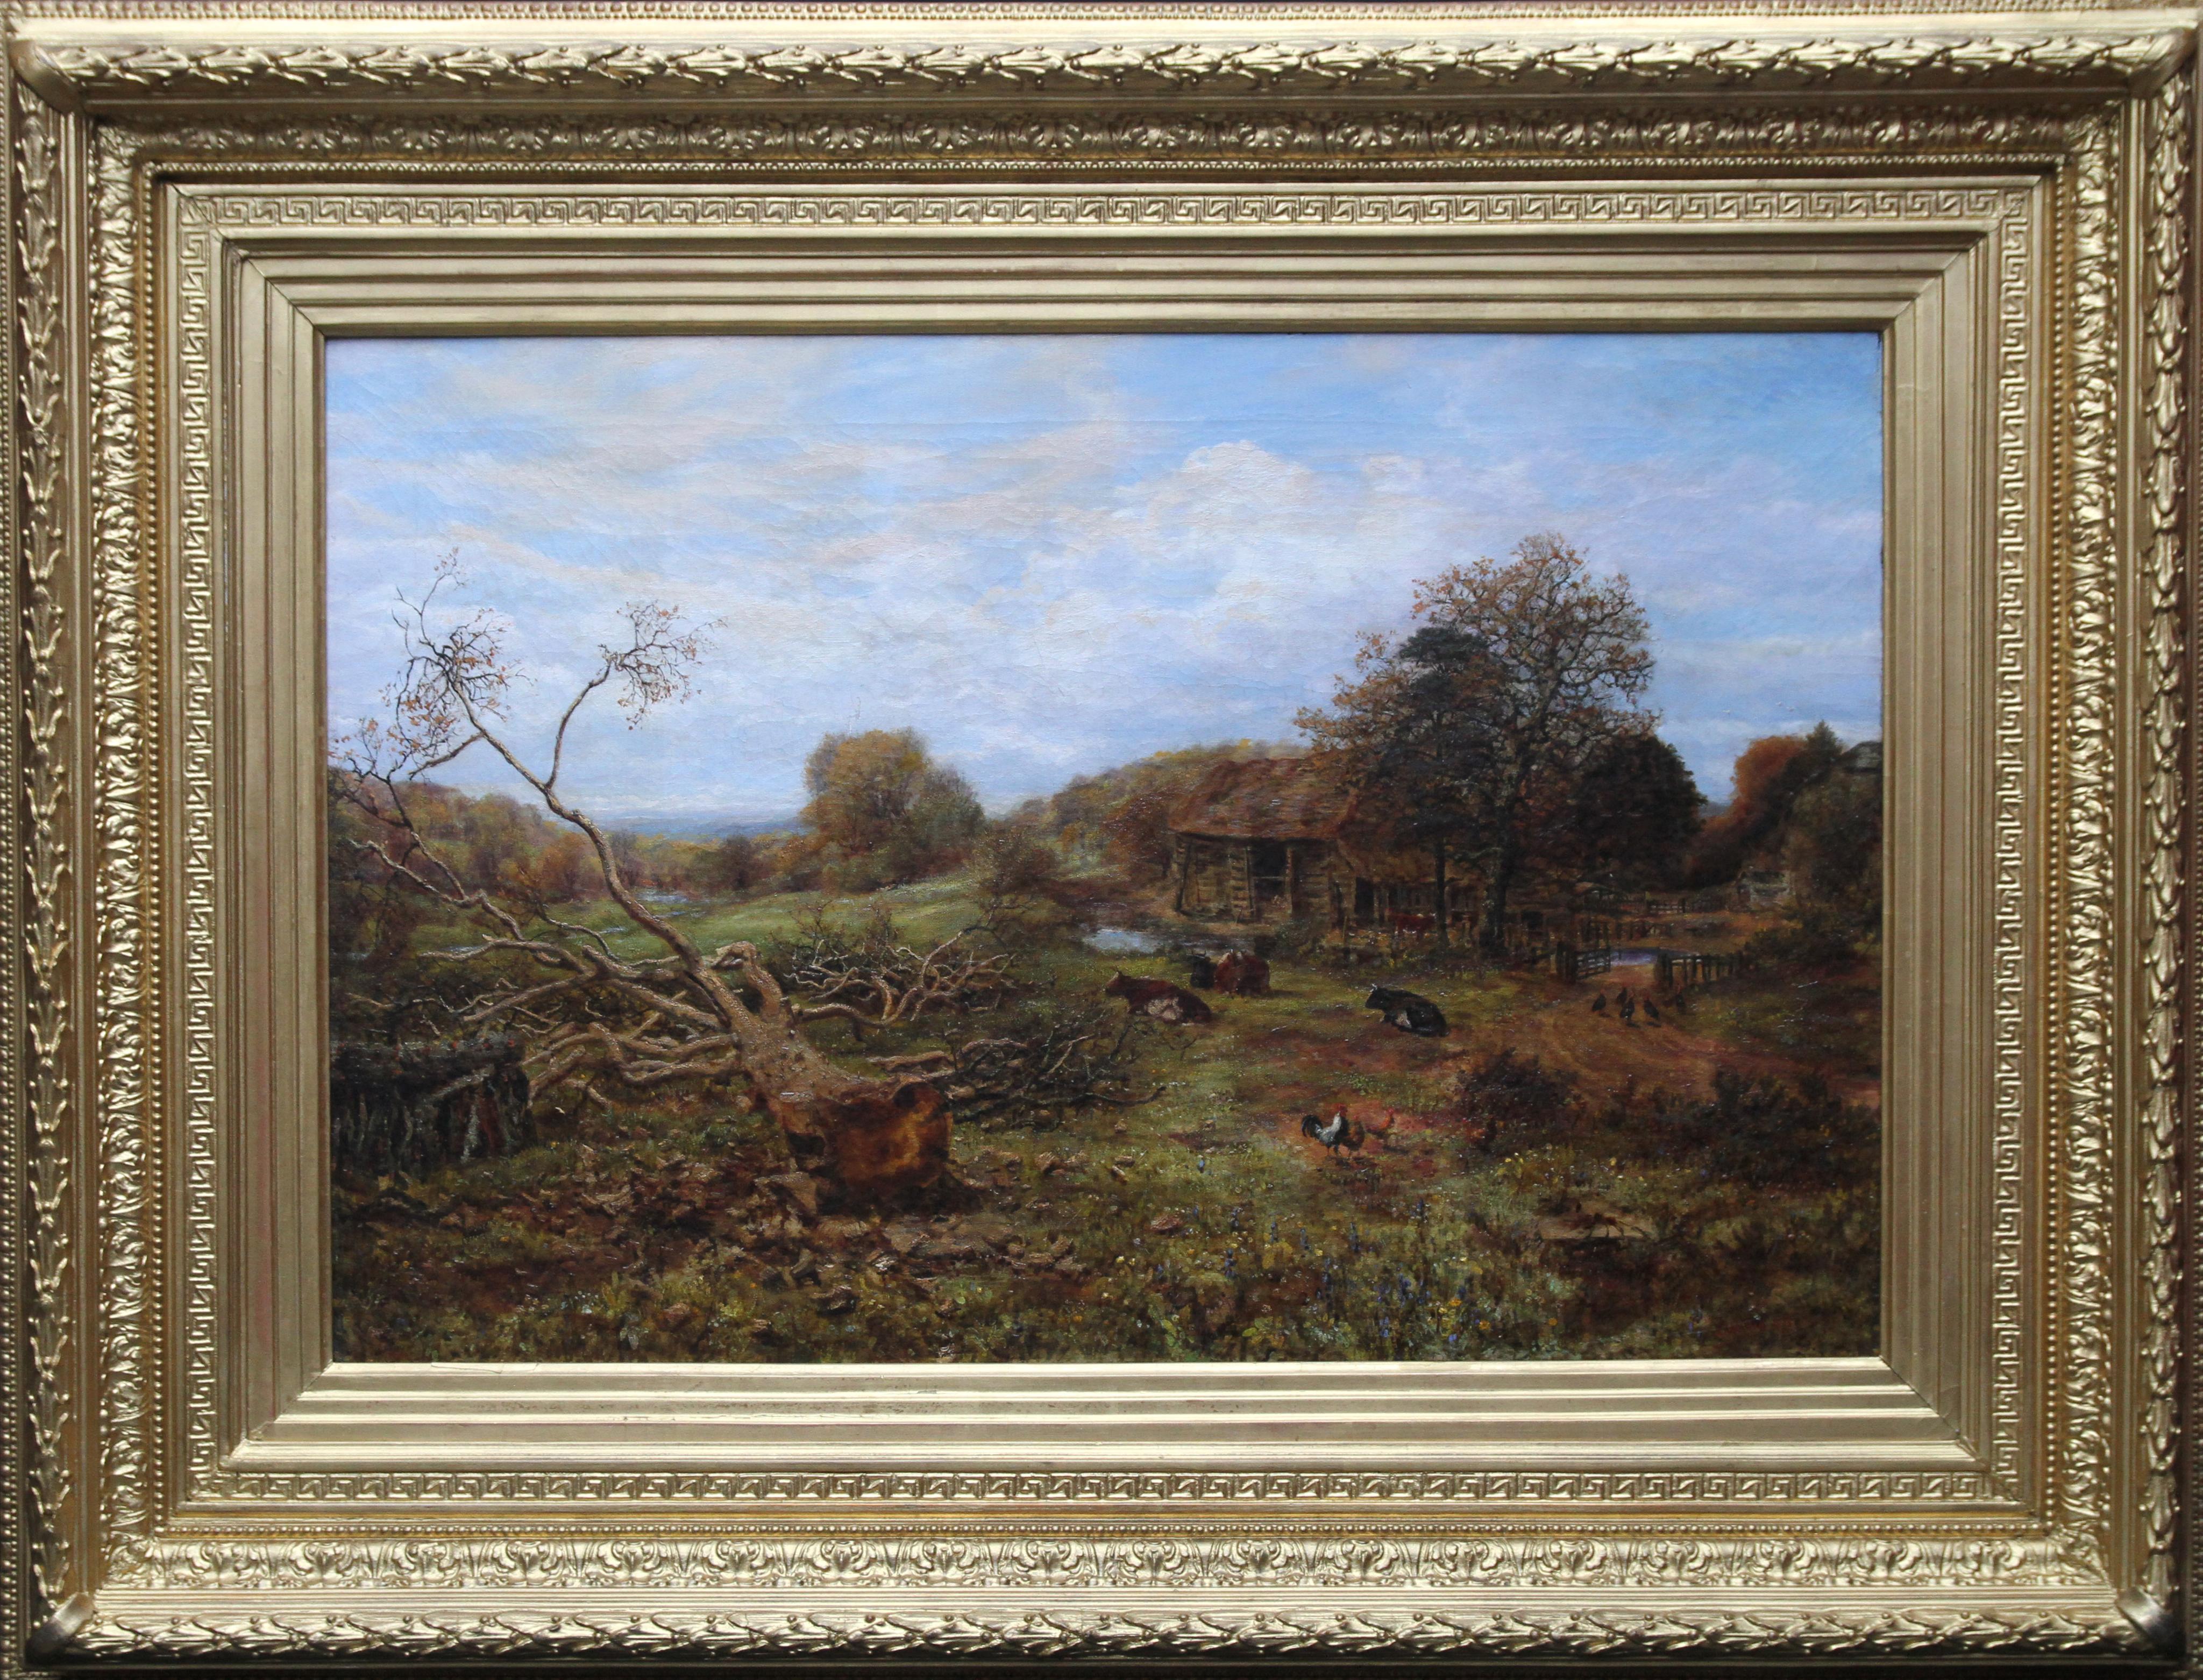 Landscape with Cattle - Surrey - British Victorian art 19th century oil painting For Sale 5